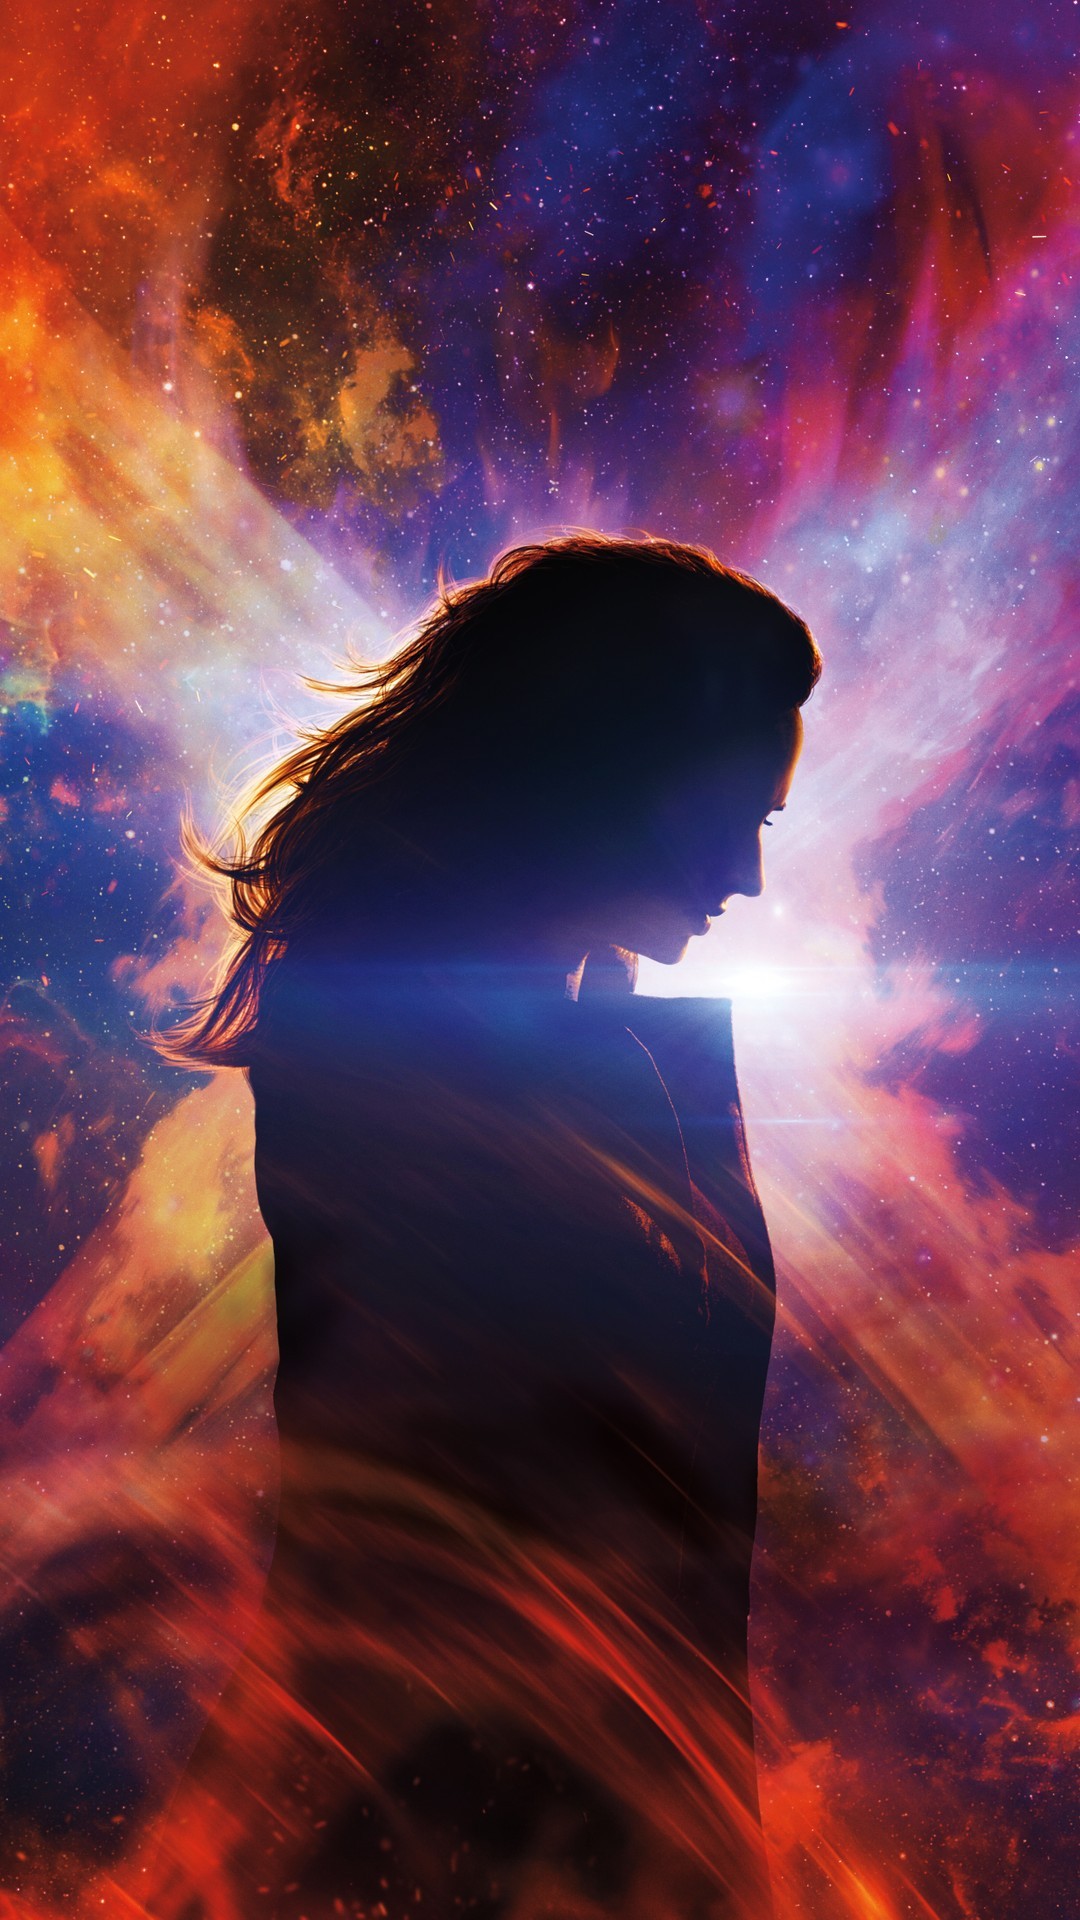 Wallpaper Dark Phoenix 2019 for iPhone with high-resolution 1080x1920 pixel. You can use this wallpaper for your iPhone 5, 6, 7, 8, X, XS, XR backgrounds, Mobile Screensaver, or iPad Lock Screen